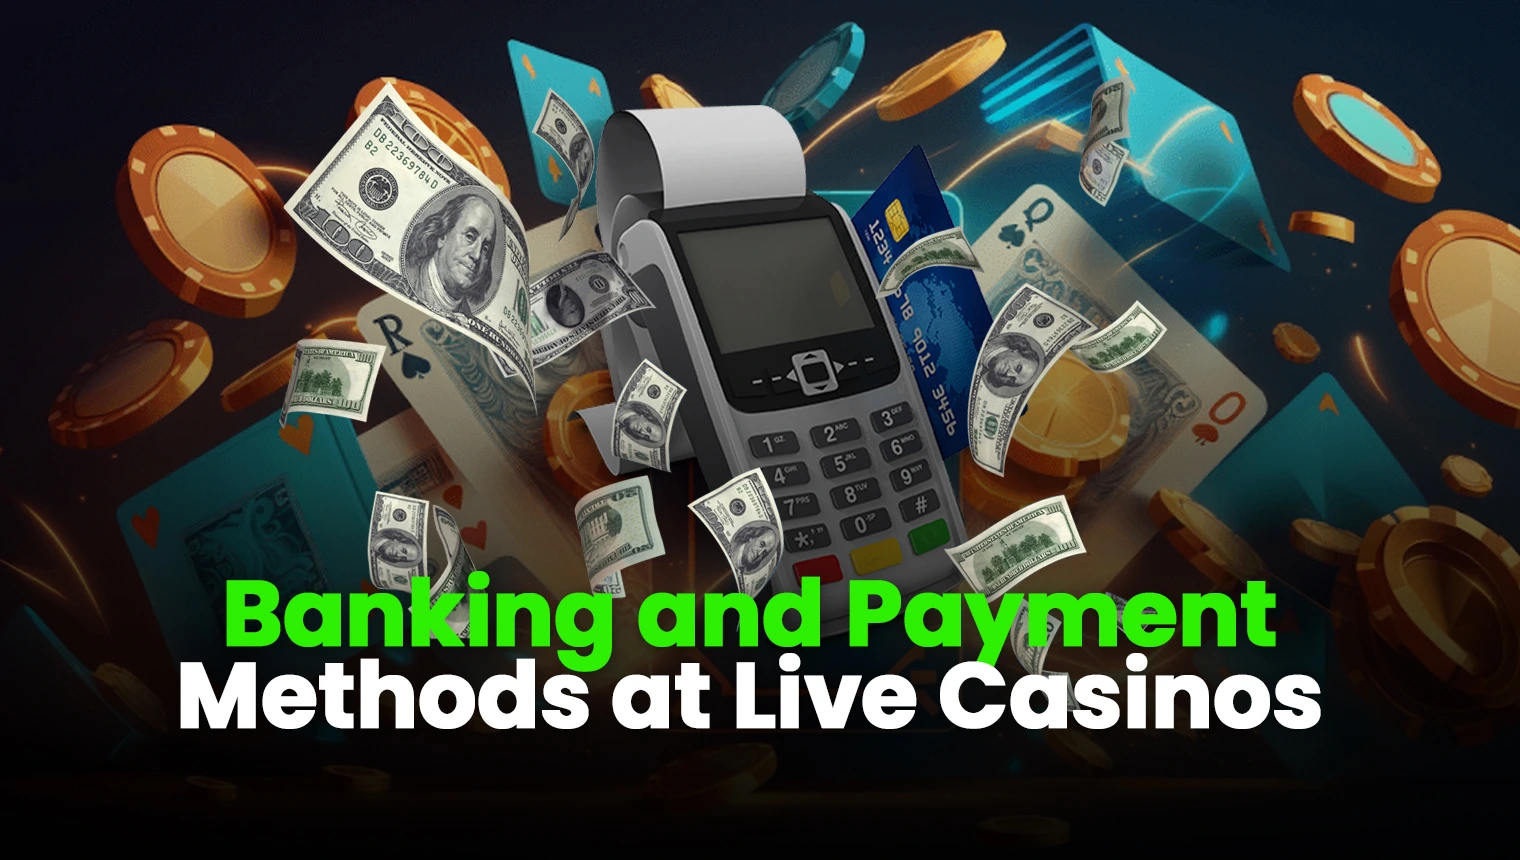 Banking and Payment Methods at Live Casinos